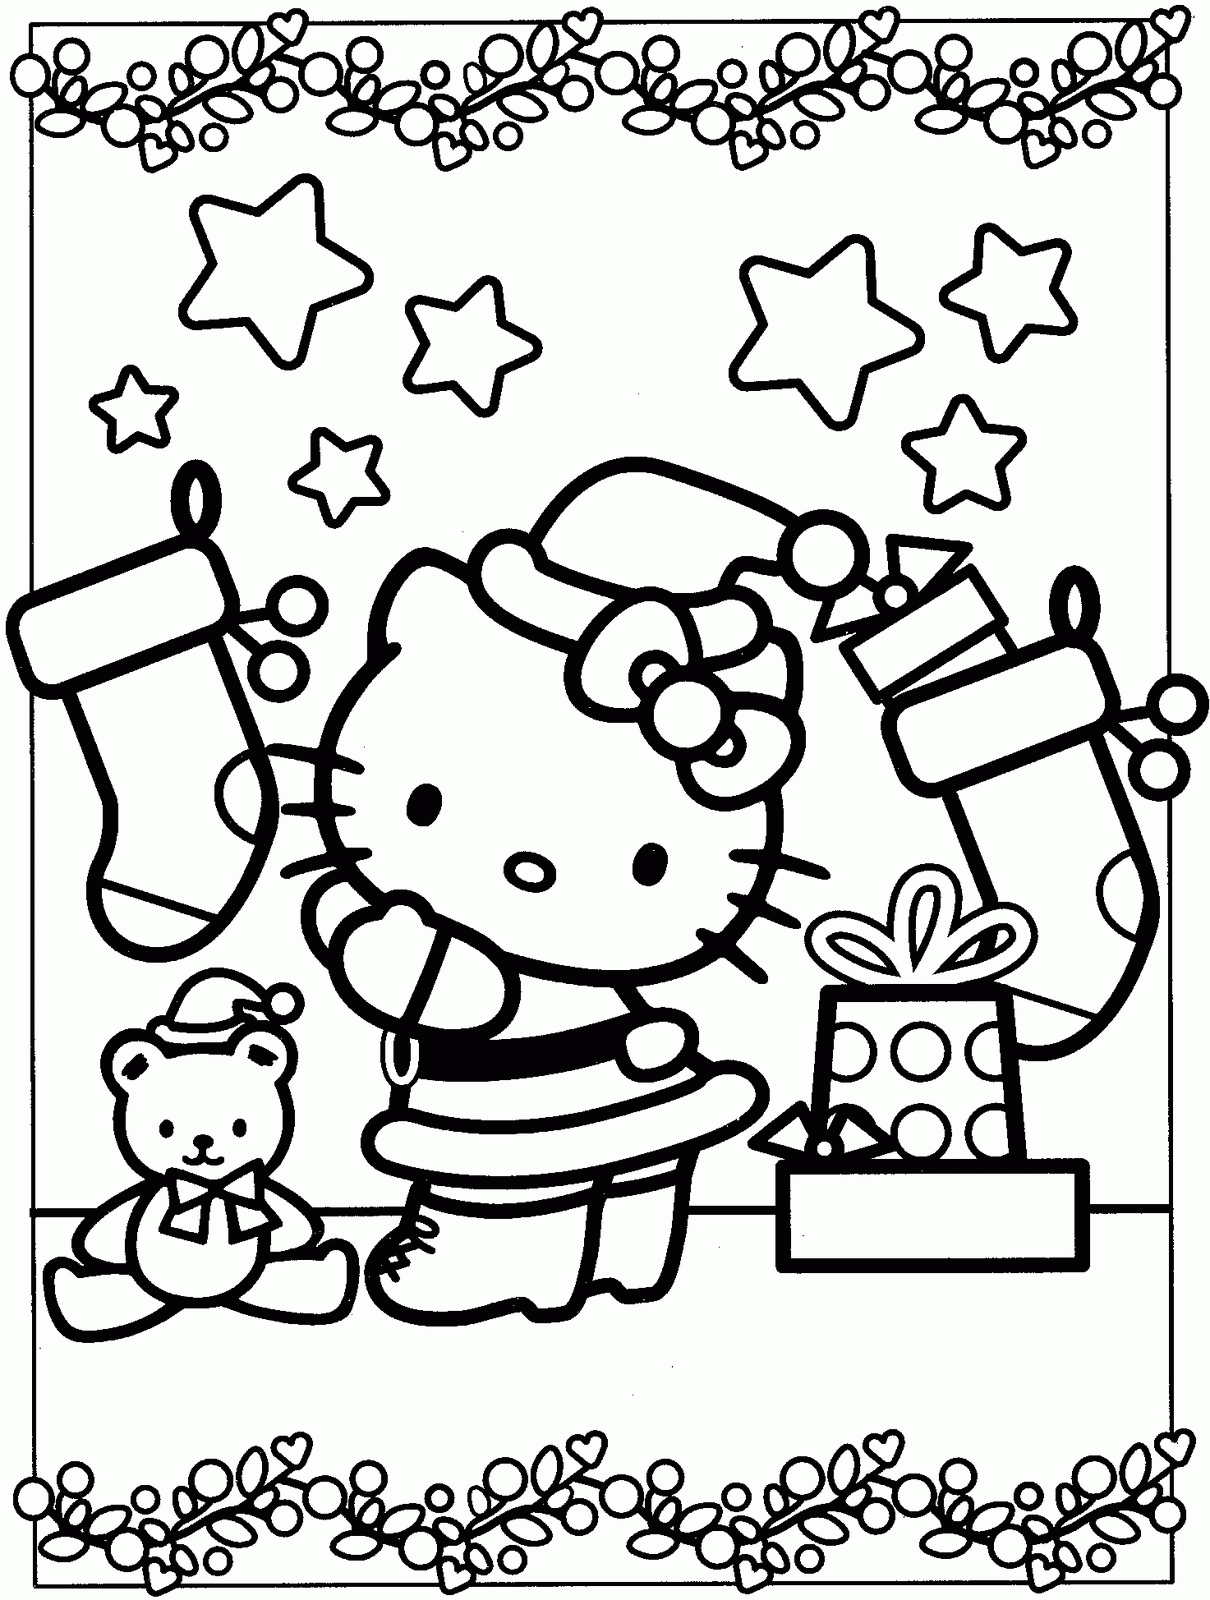 Christmas Coloring Pages Hello Kitty   Coloring Pages For All Ages ...